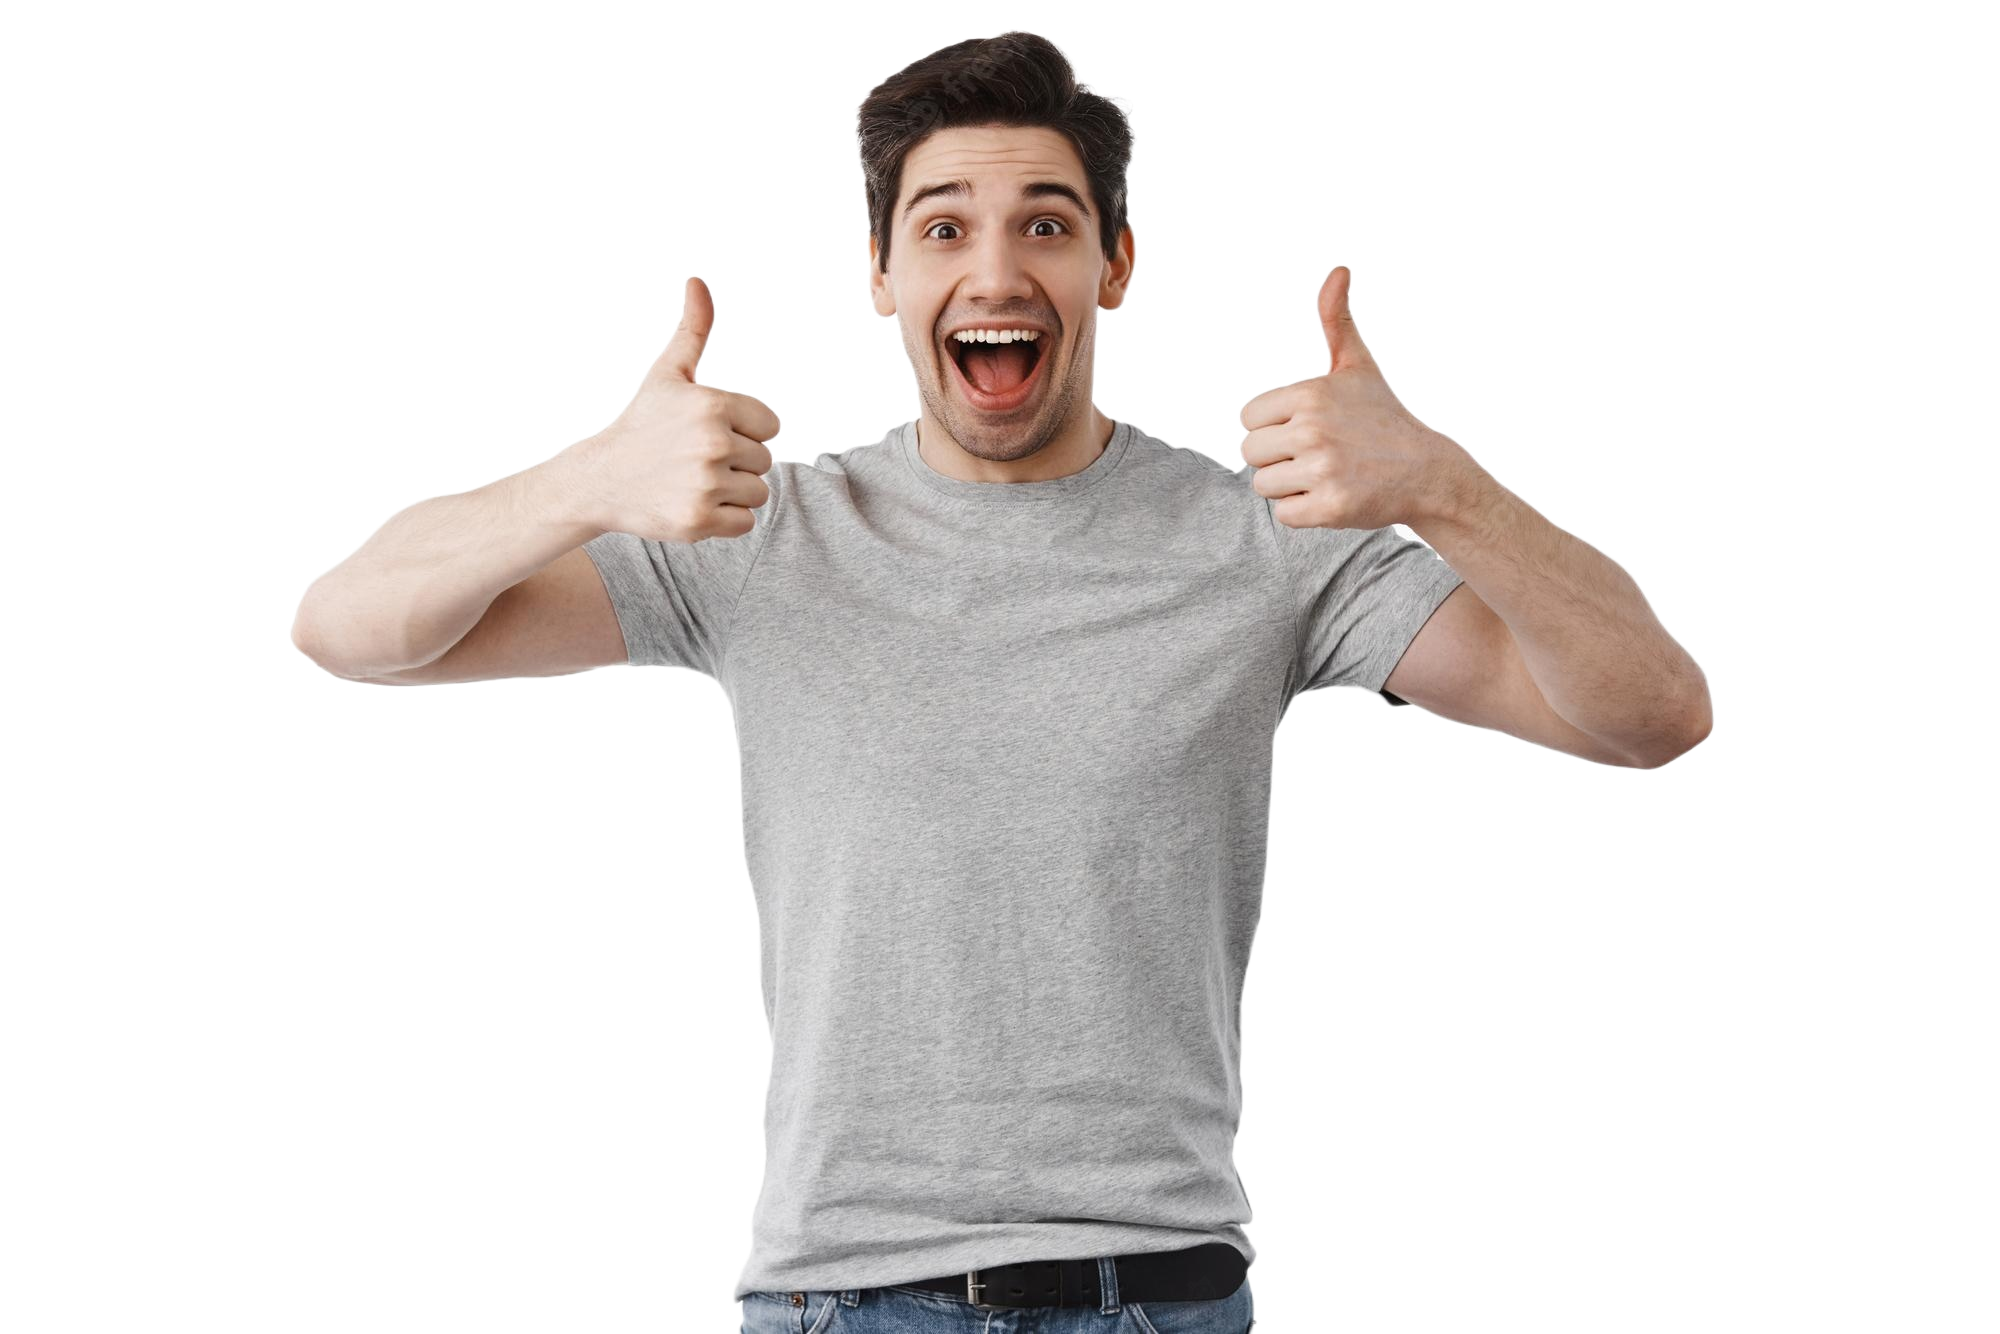 thank you stock image website I forgot the name of for this very cool stock image of a man with his thumbs up